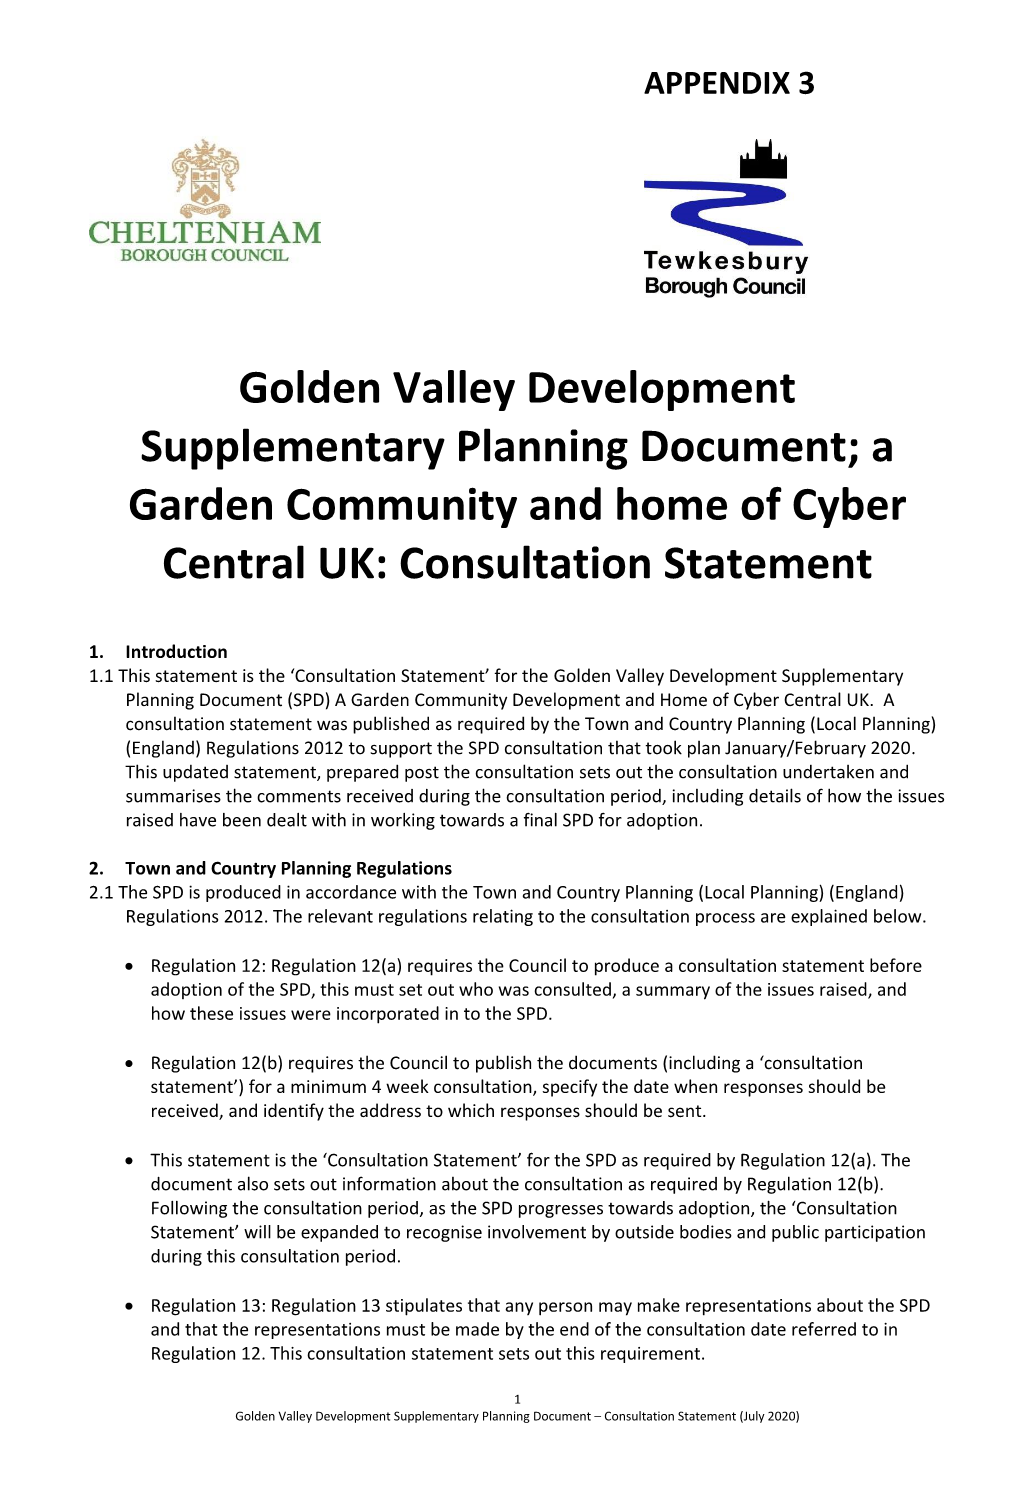 Golden Valley Development Supplementary Planning Document; a Garden Community and Home of Cyber Central UK: Consultation Statement